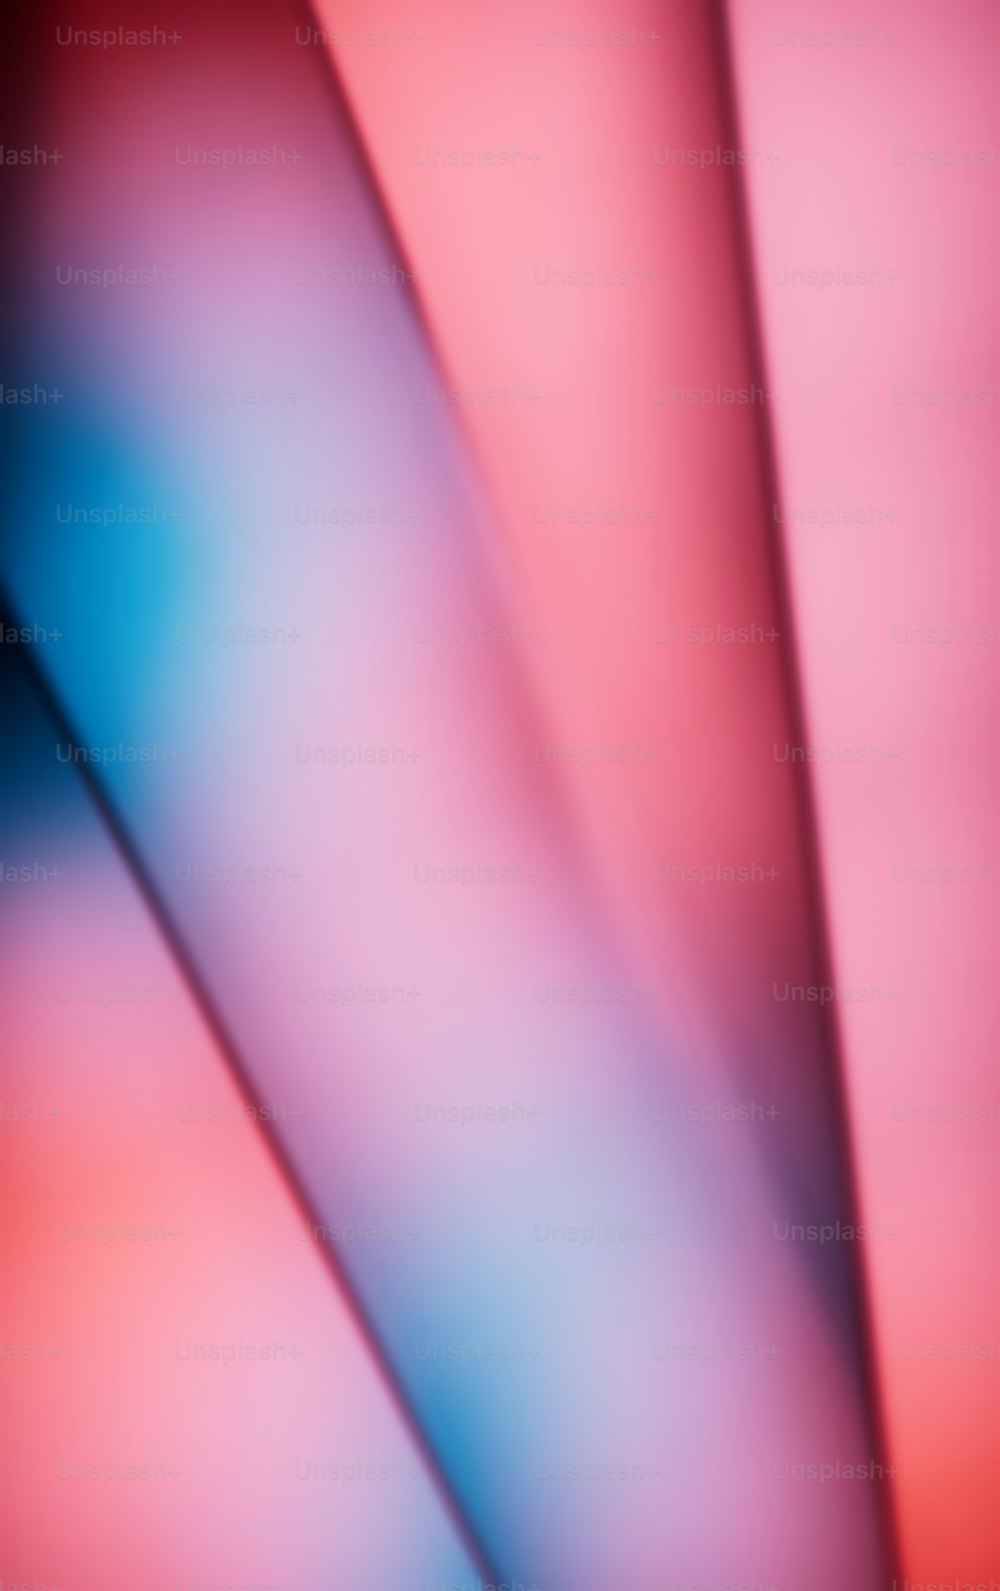 a blurry image of a red and blue background